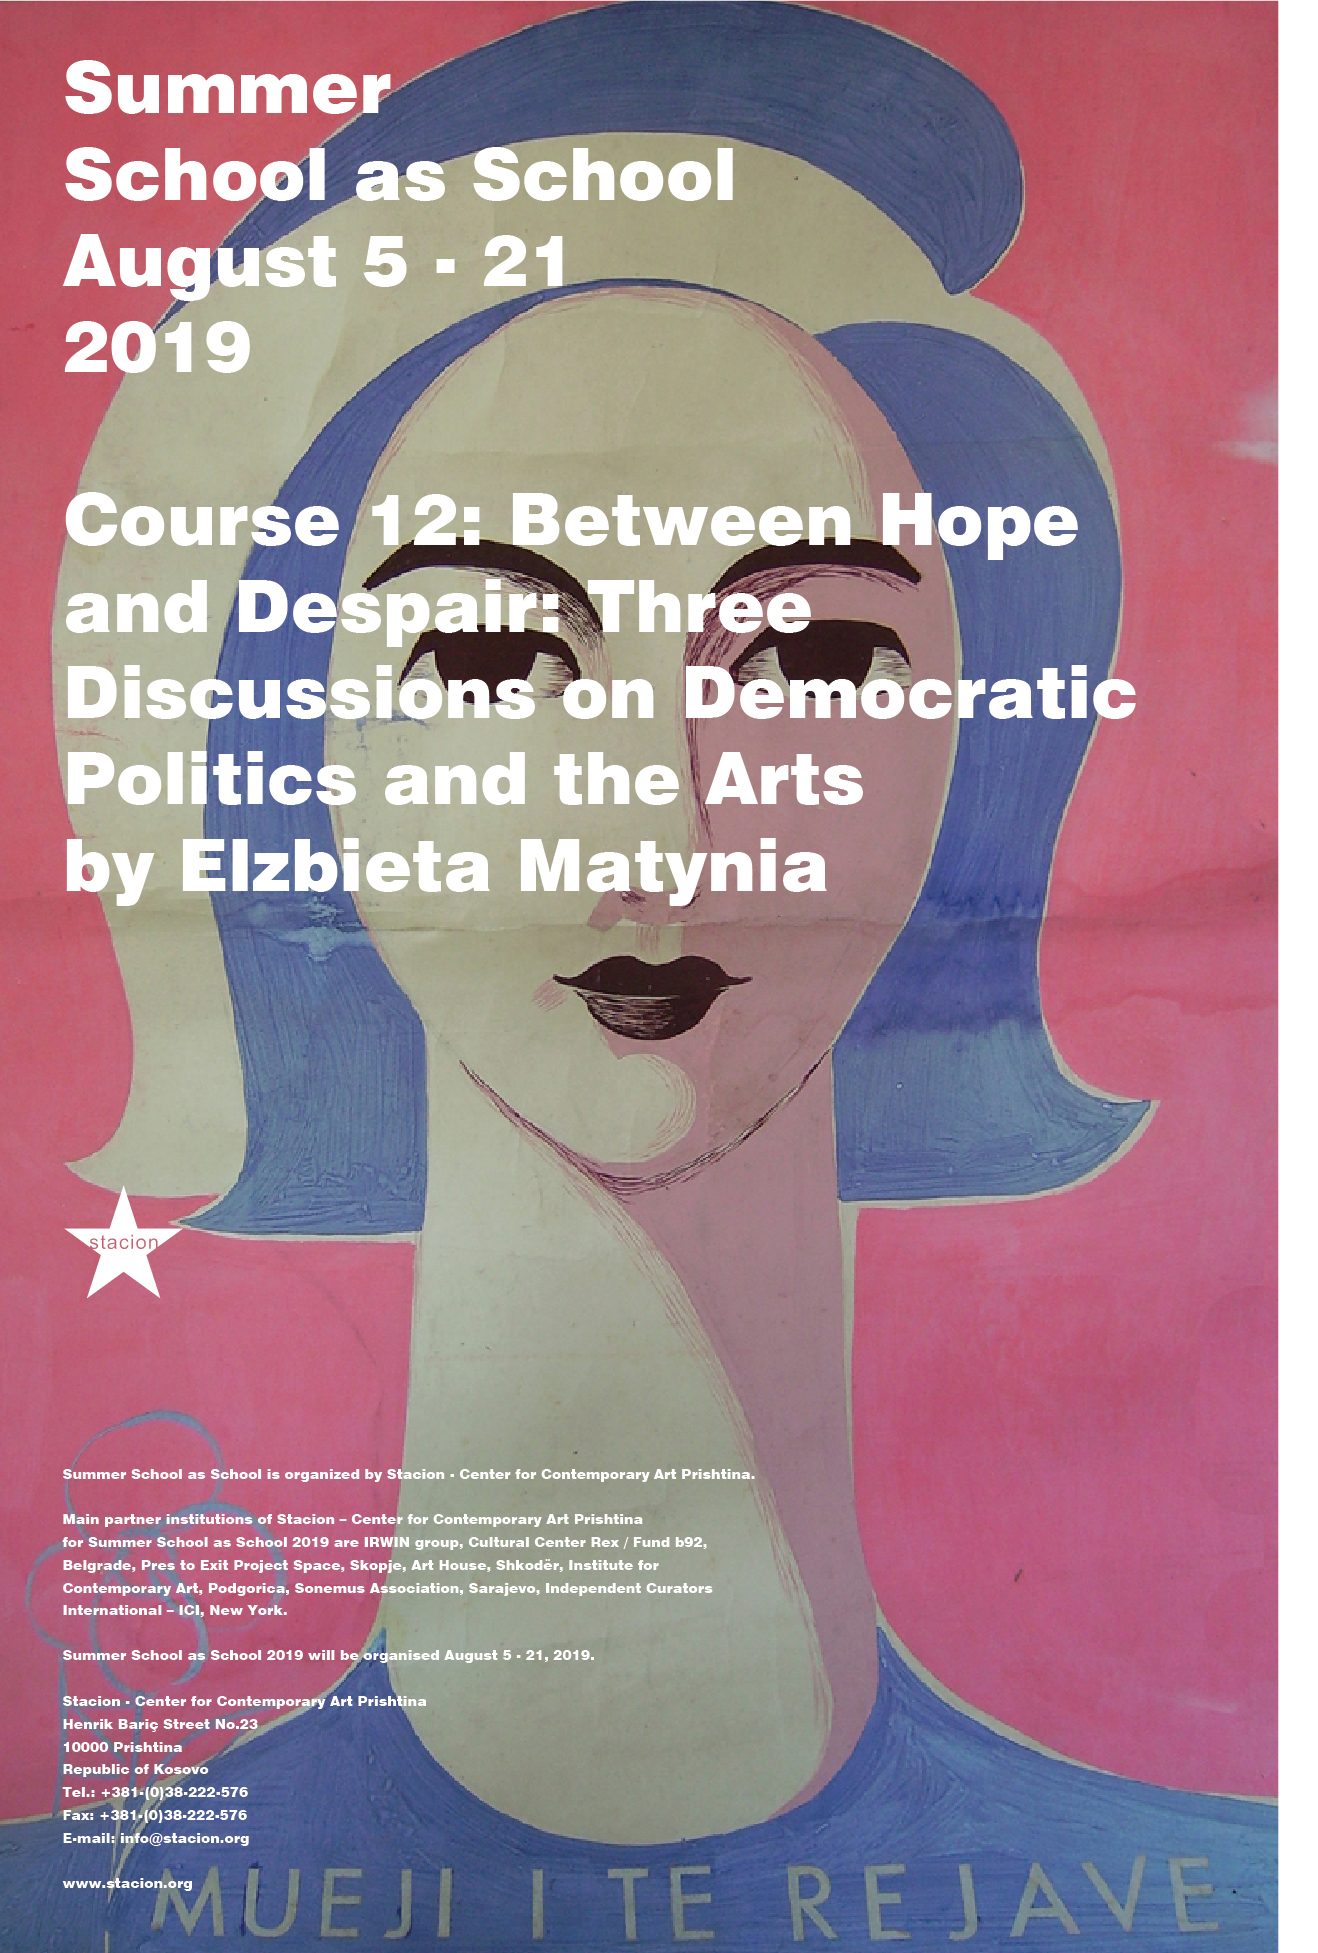 Course 12: Between Hope and Despair - Three Discussions on Democratic Politics and the Arts